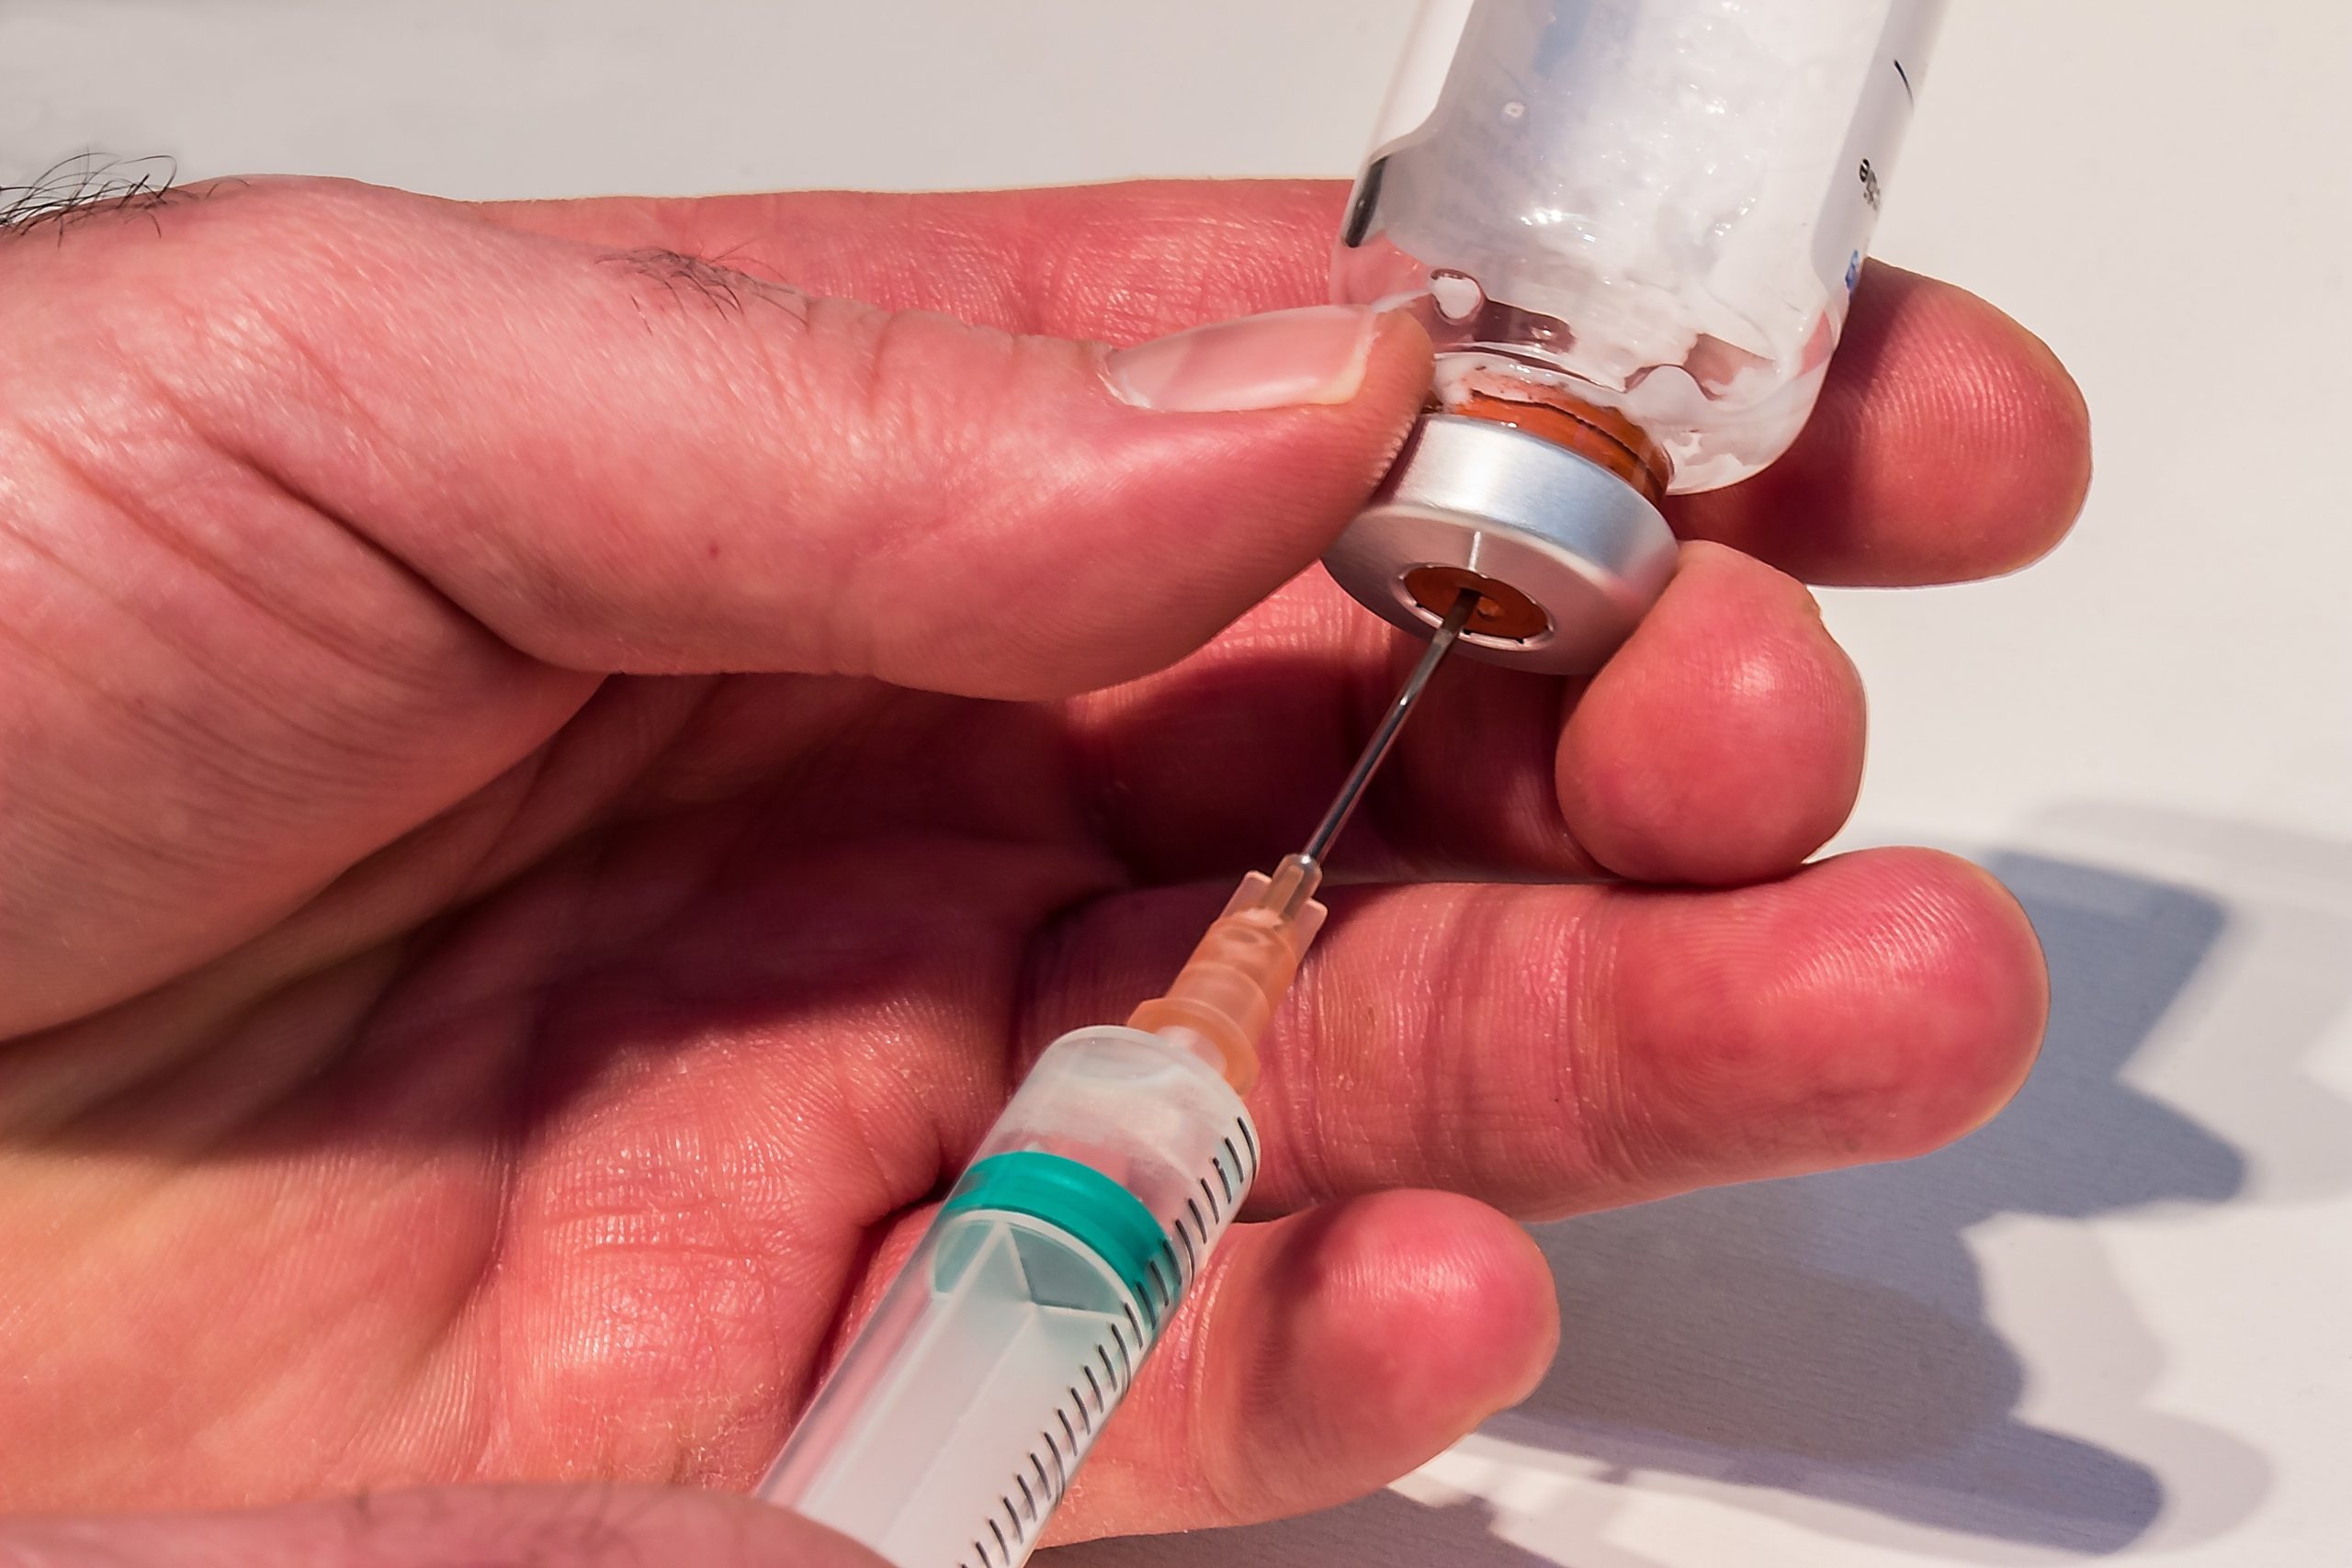 Health centre worker steals vials of powerful anaesthetic for a year in Spain's Valencia area